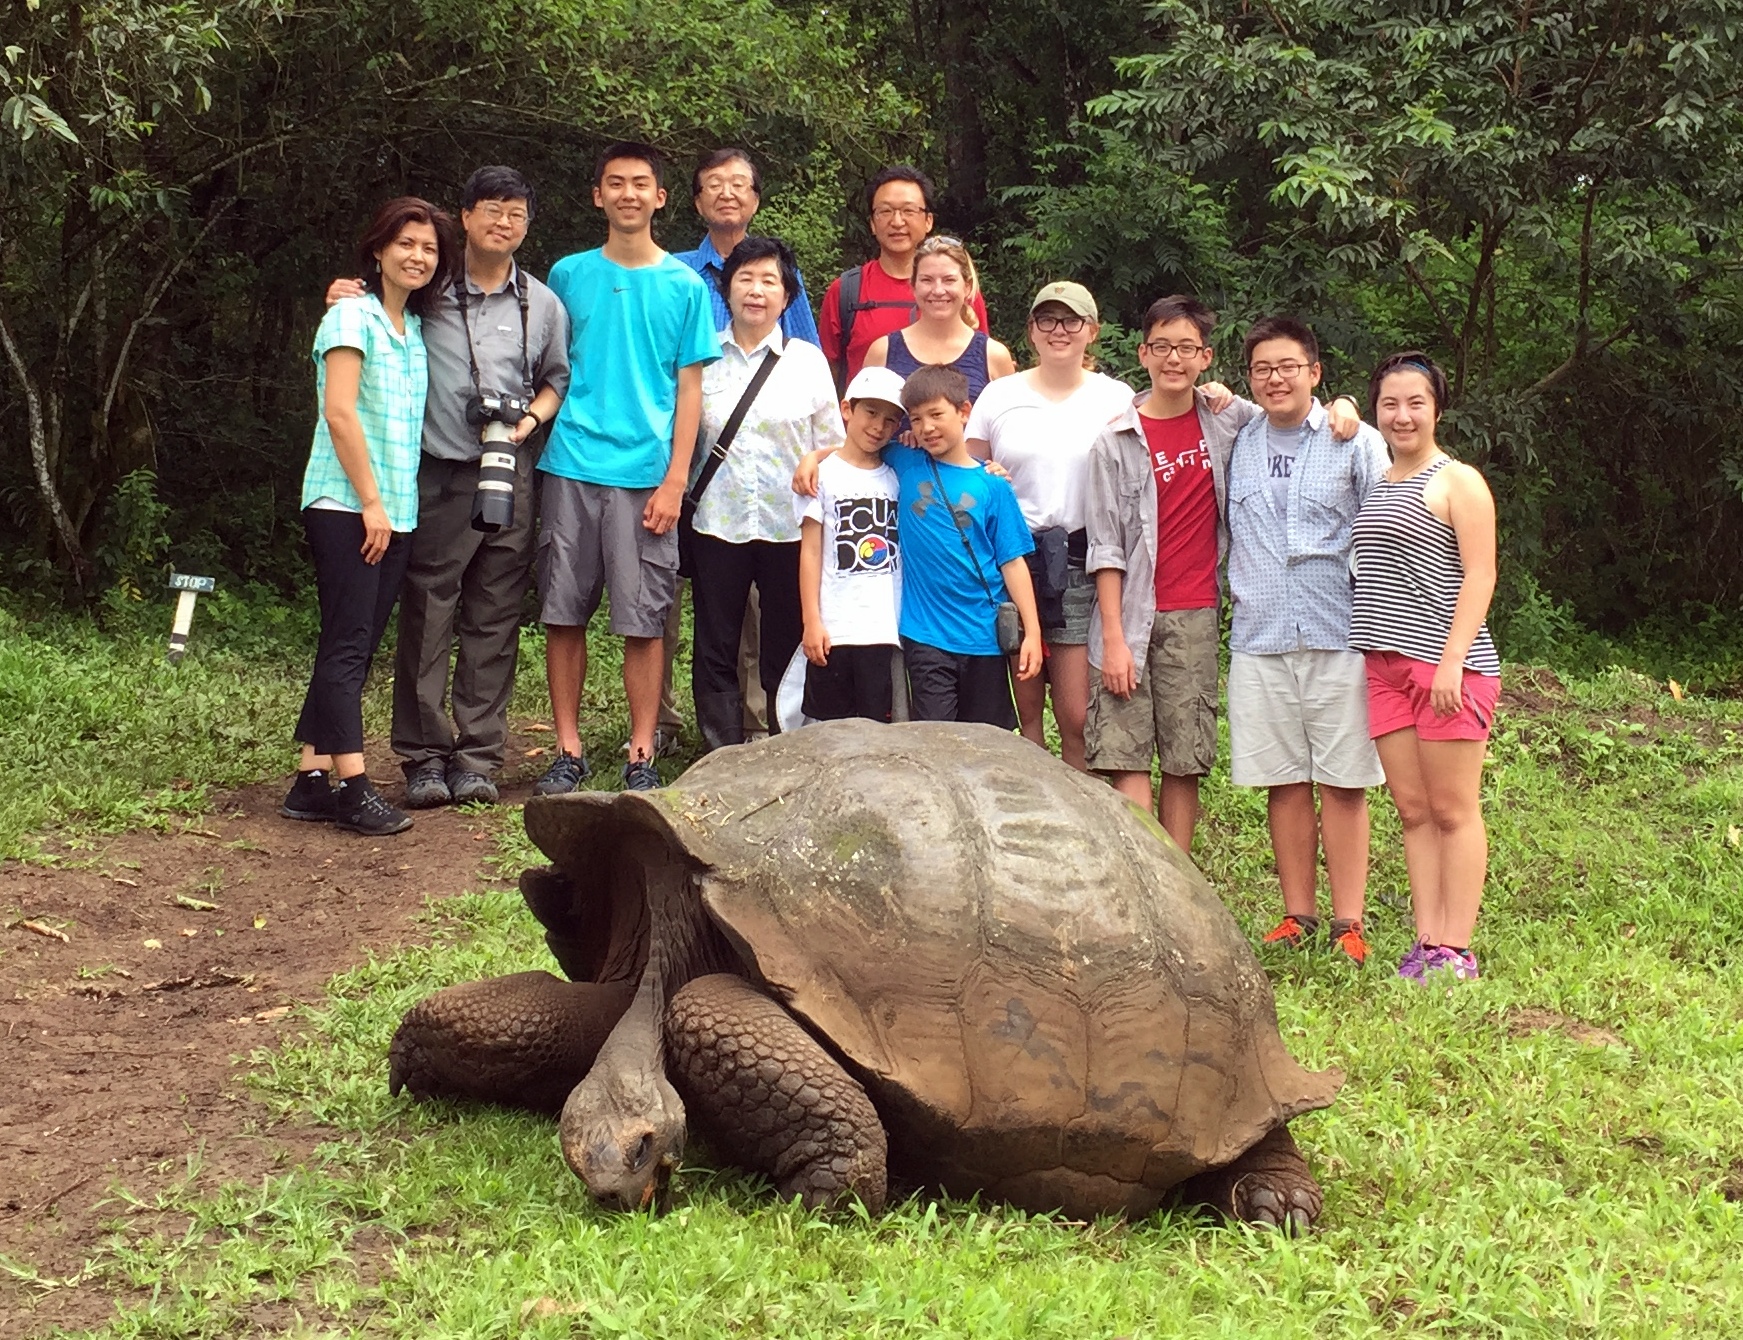 Chan Il Chung with his family in Ecuador, 2015